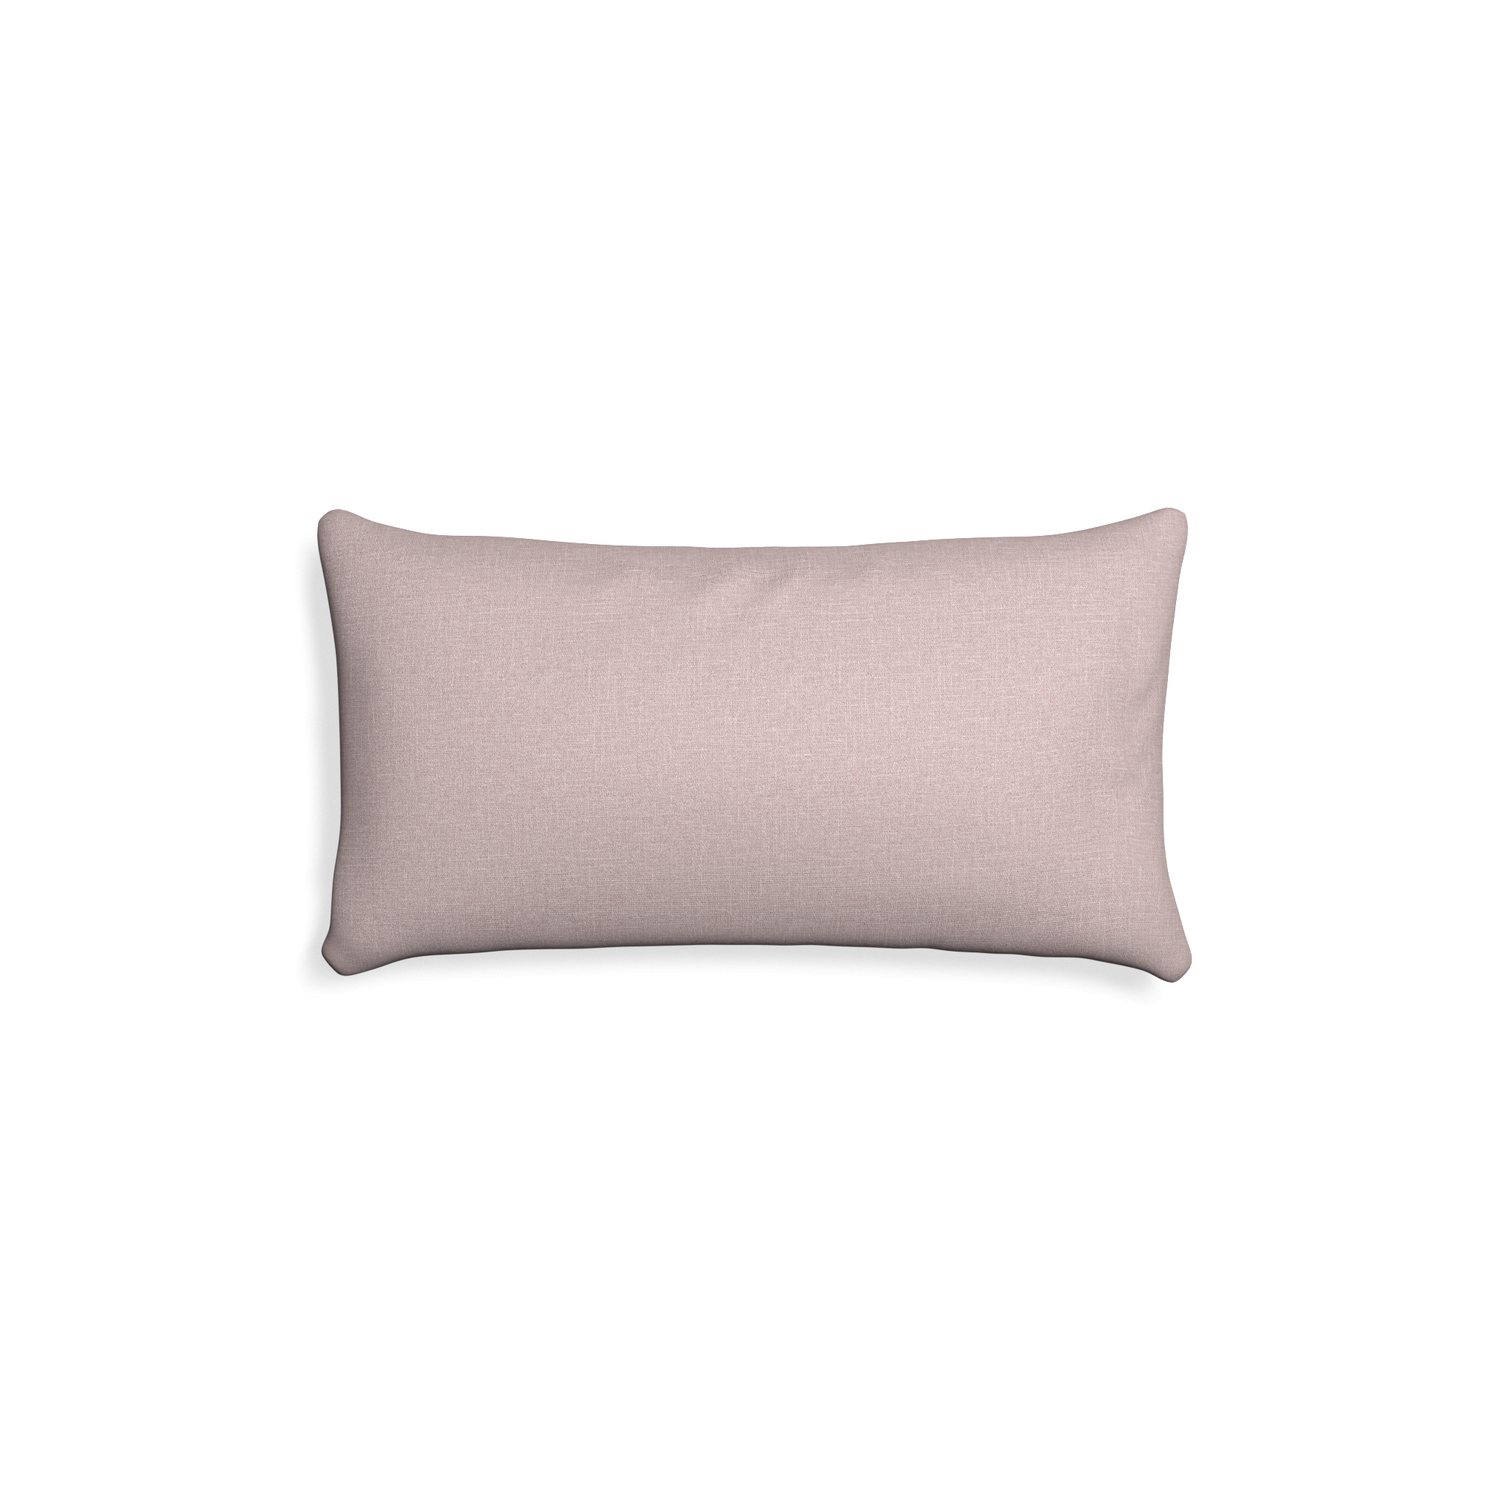 Petite-lumbar orchid custom mauve pinkpillow with none on white background